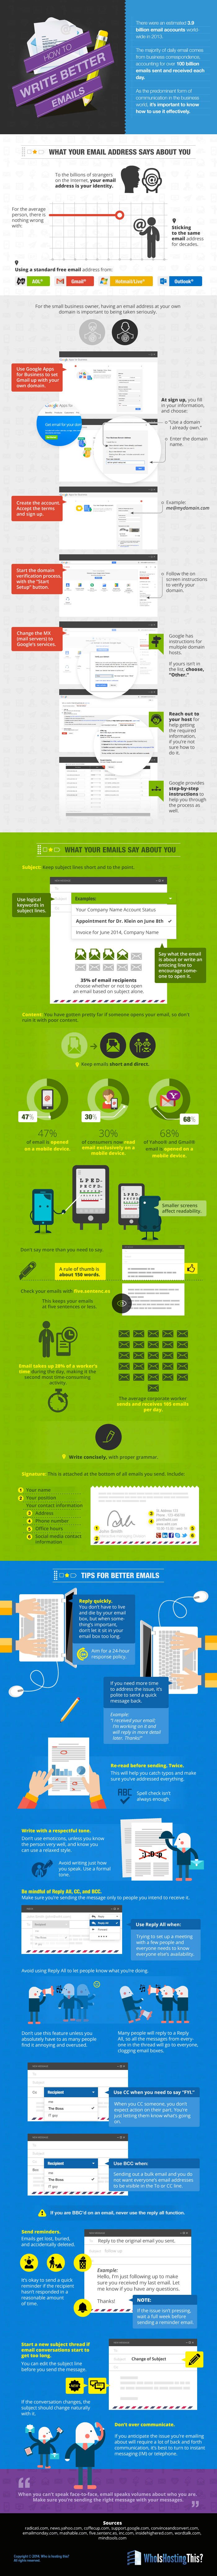 1410362476-how-write-better-emails-infographic